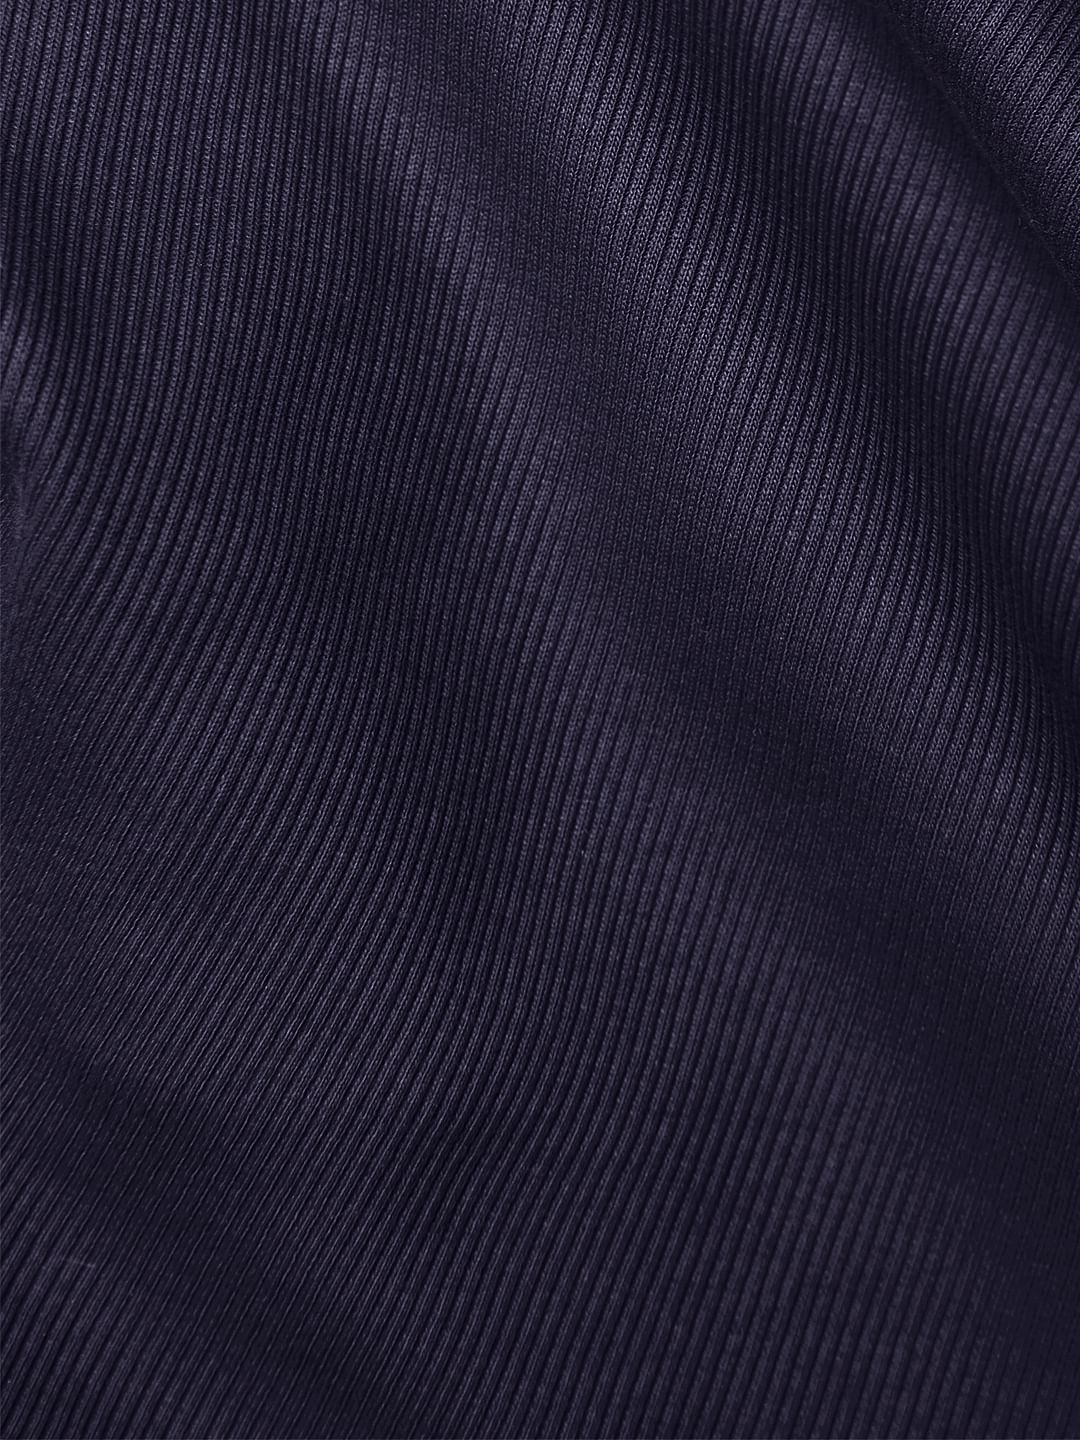 Solids: Berry (Square-Neck)